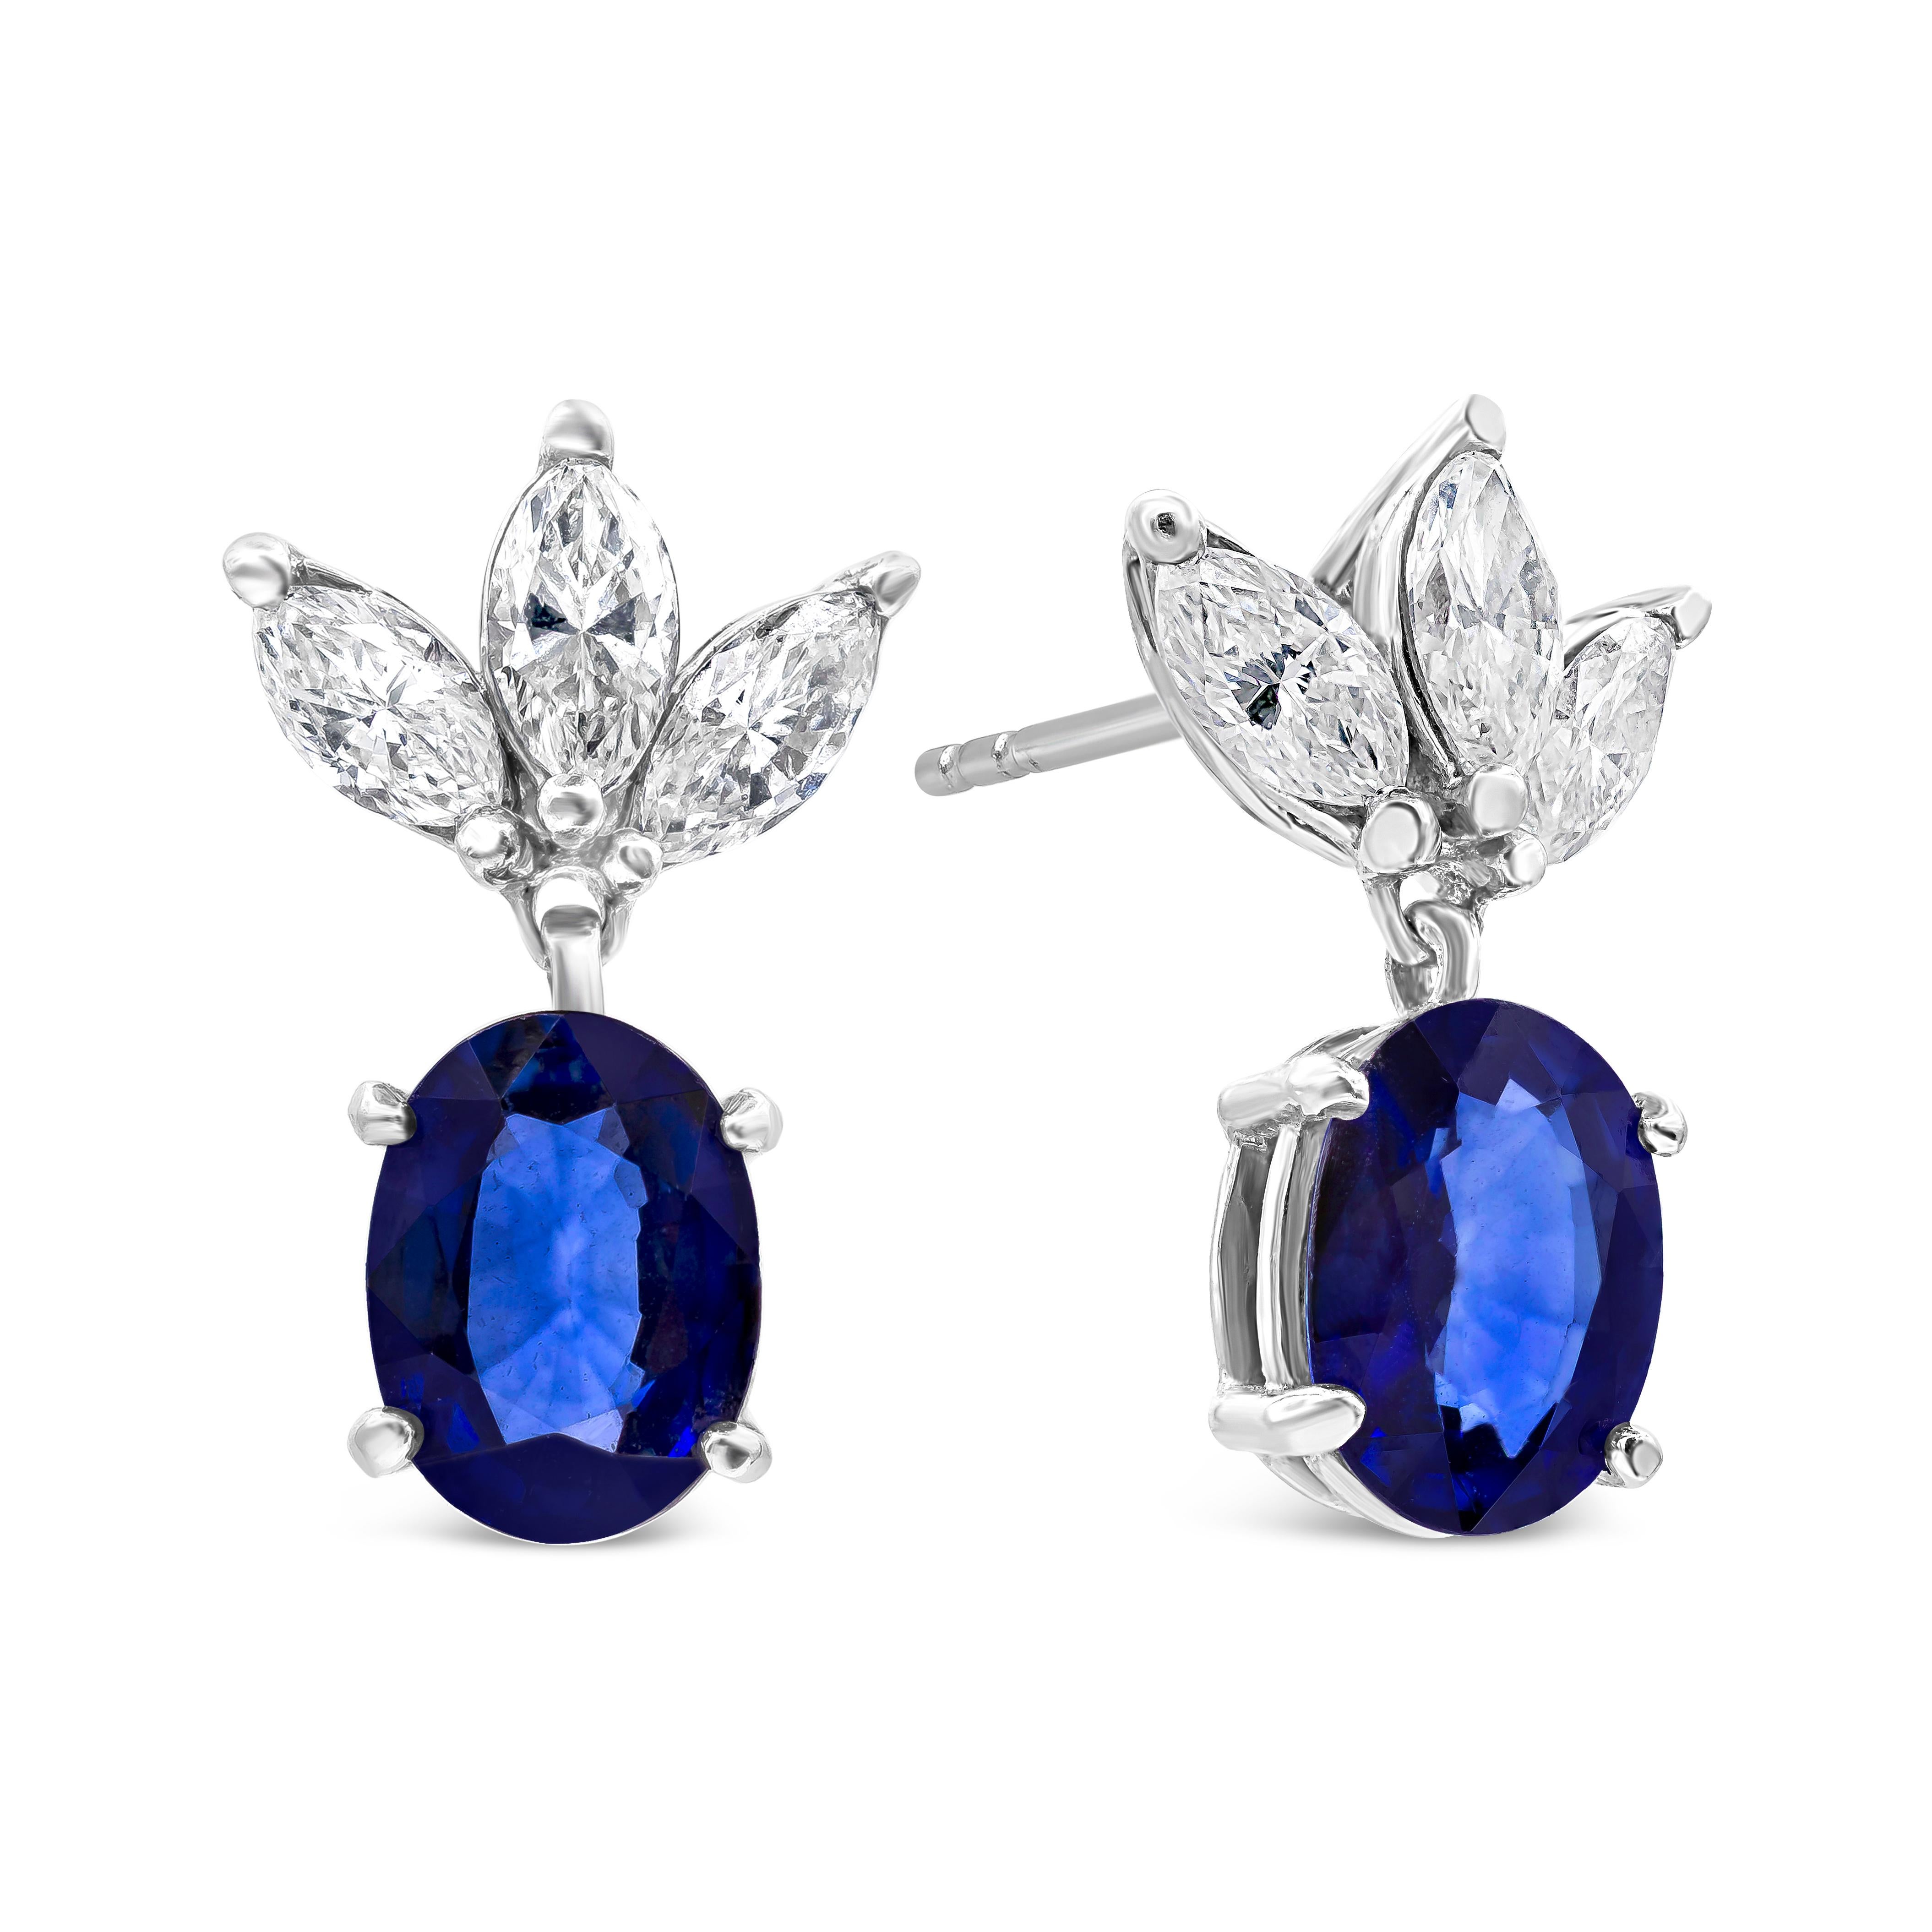 Each earring features a color-rich blue sapphire weighing 4.21 carats total, set in a four prong basket setting. Suspended on three marquise cut diamonds weighing 1.21 carats total. Finely made in 14k white gold.
Sapphires are natural corundum but